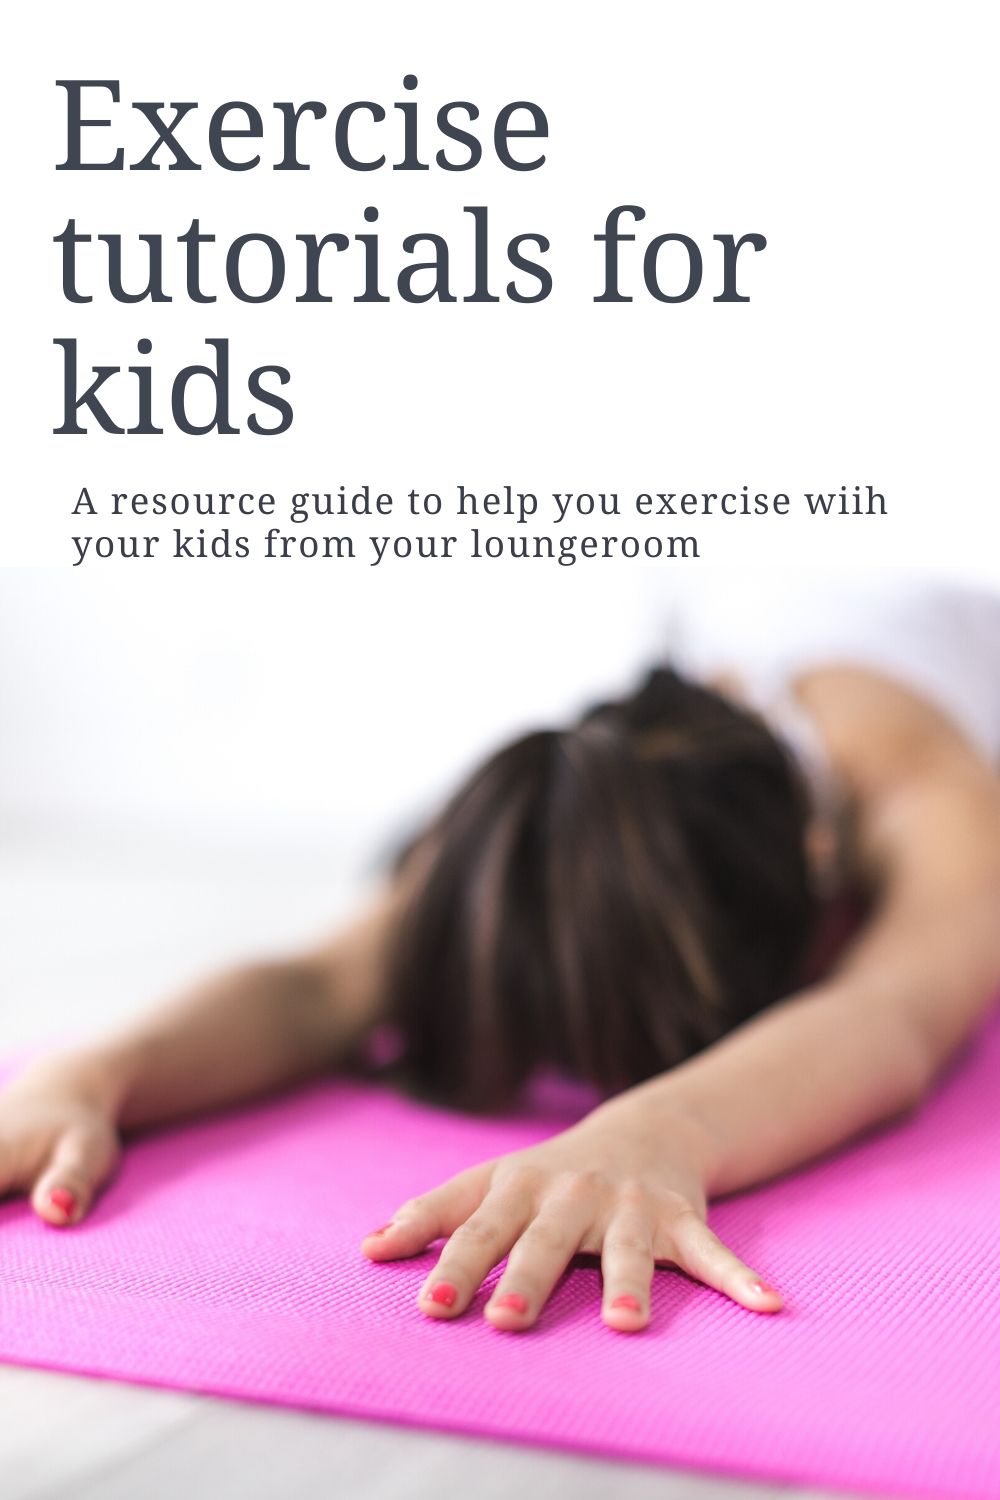 Exercise at Home for Kids : Tutorials for Home